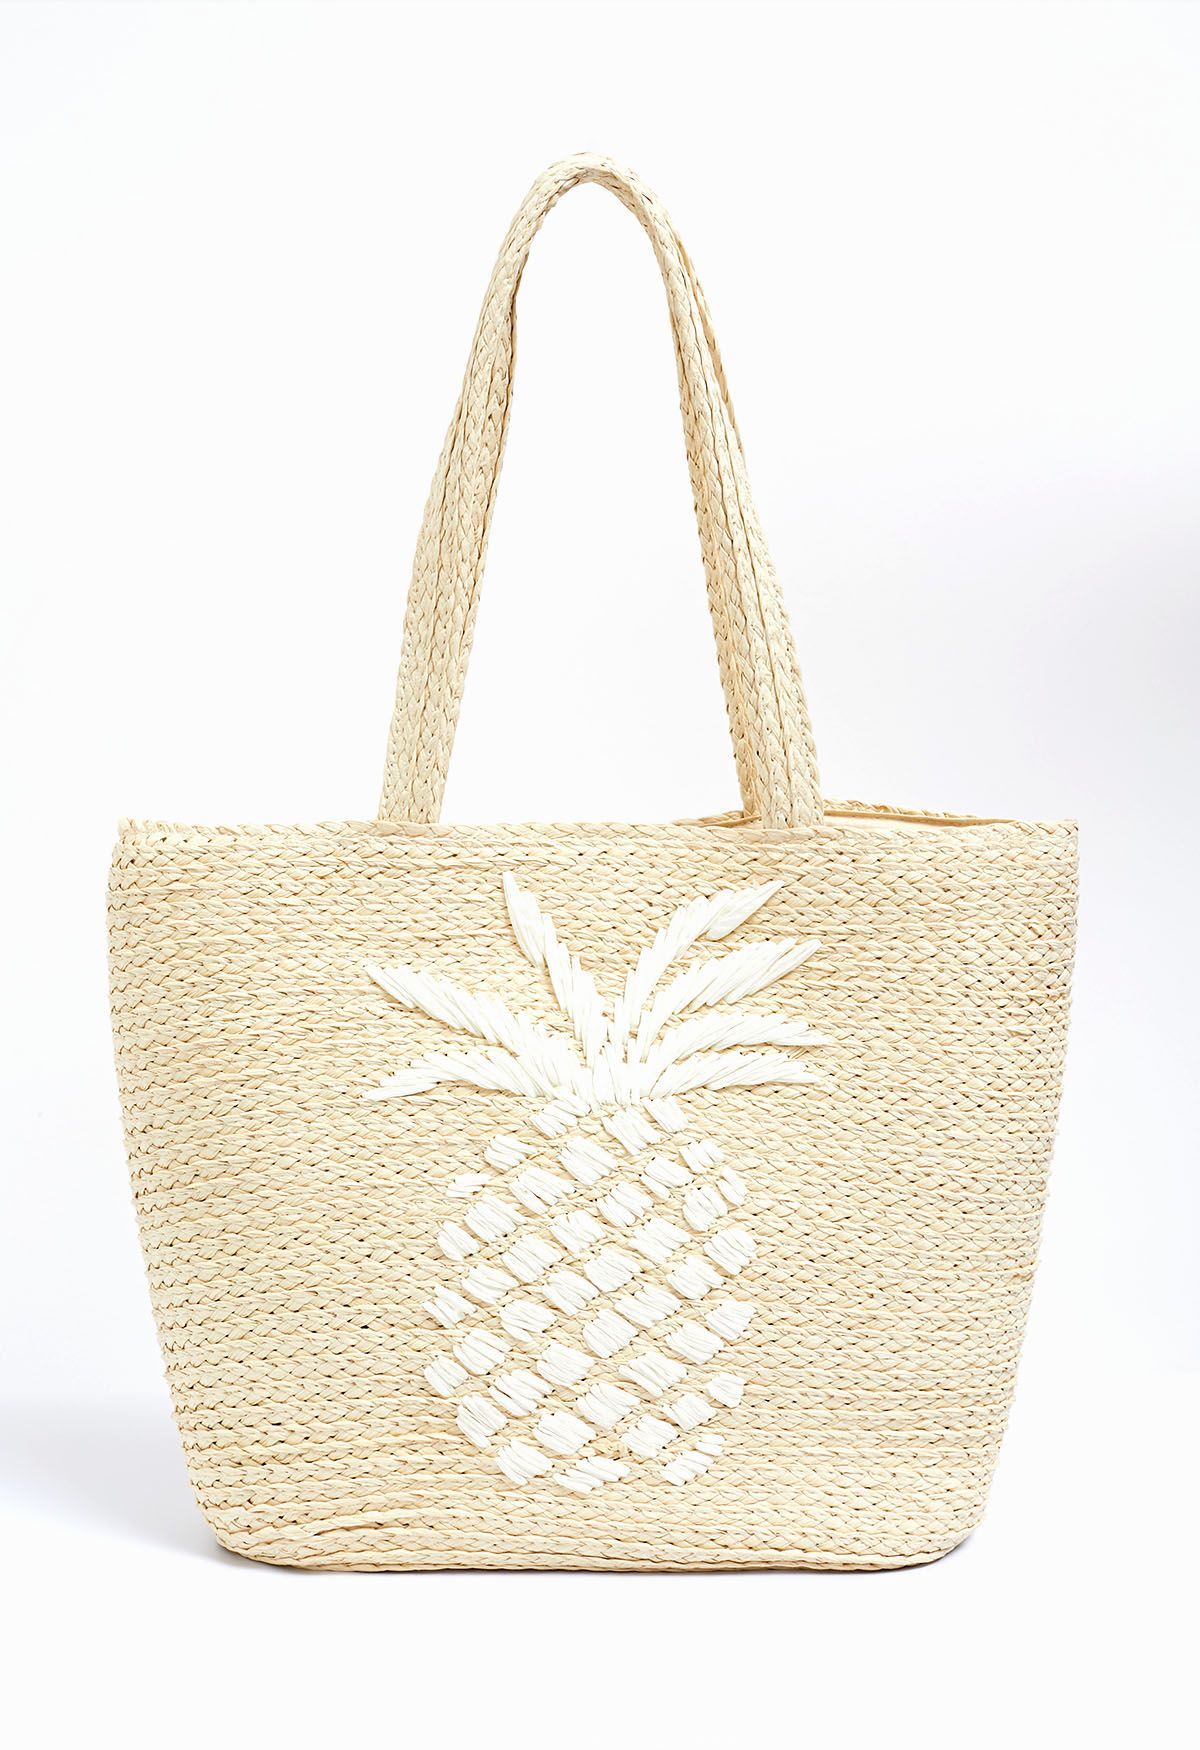 Pineapple Woven Straw Shoulder Bag | Chicwish